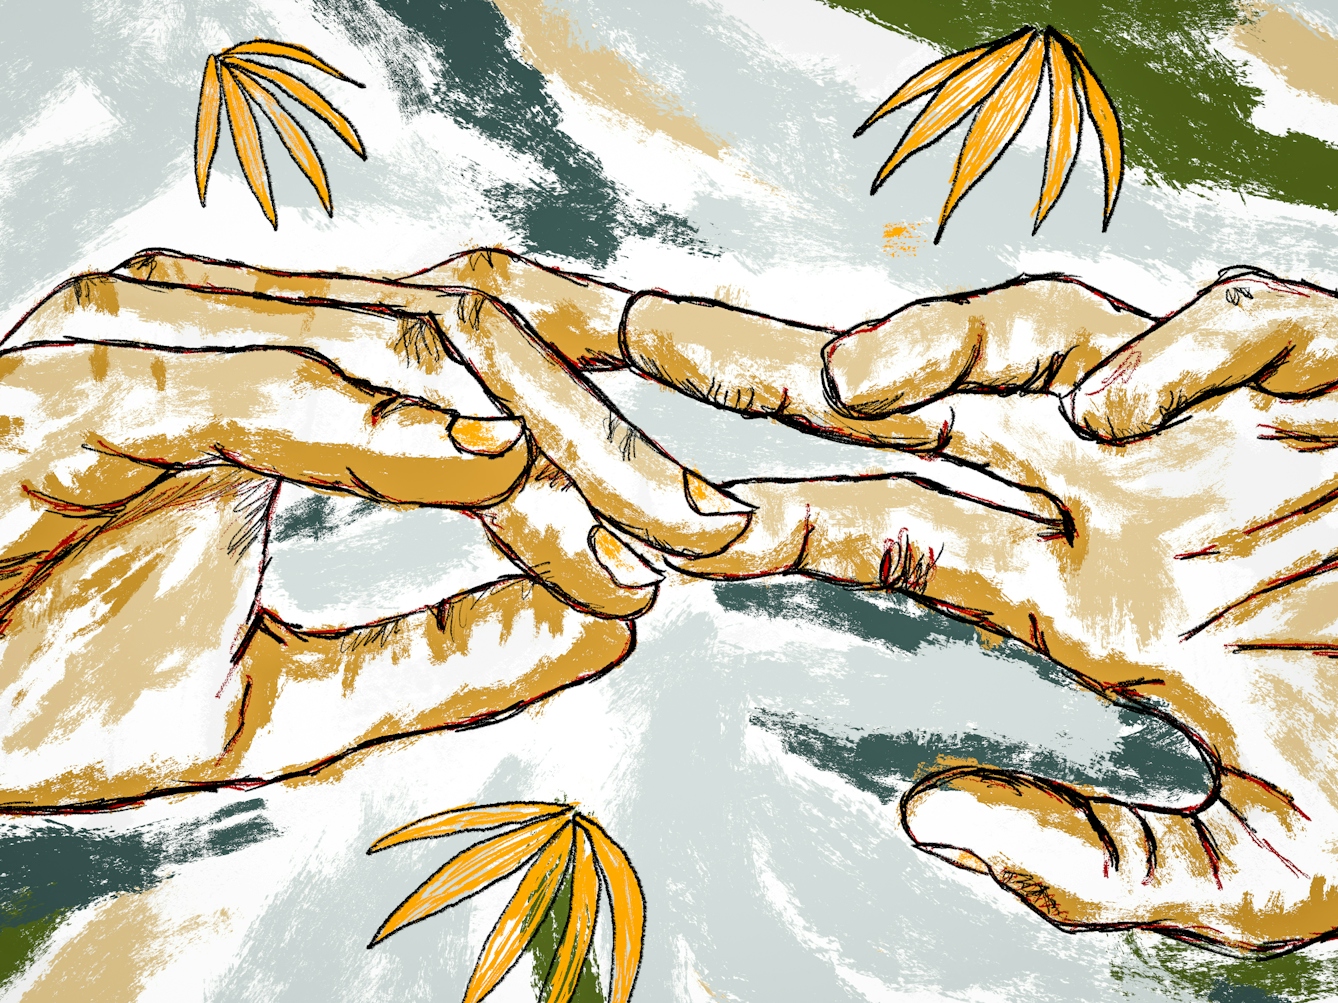 Detail from a larger colour digital artwork showing a figurative study of a pair of hands gracefully suspended in mid air, visible from just above the wrists. The hand on the right is held palm upwards, fingers slightly extended. The hand on the left is palm down, fingers extended slightly towards the other hand, fingertips just making gentle contact. The background is made up of light textured rough lines of green, light blue greys and whites, punctuated by orange leaf-like plants.